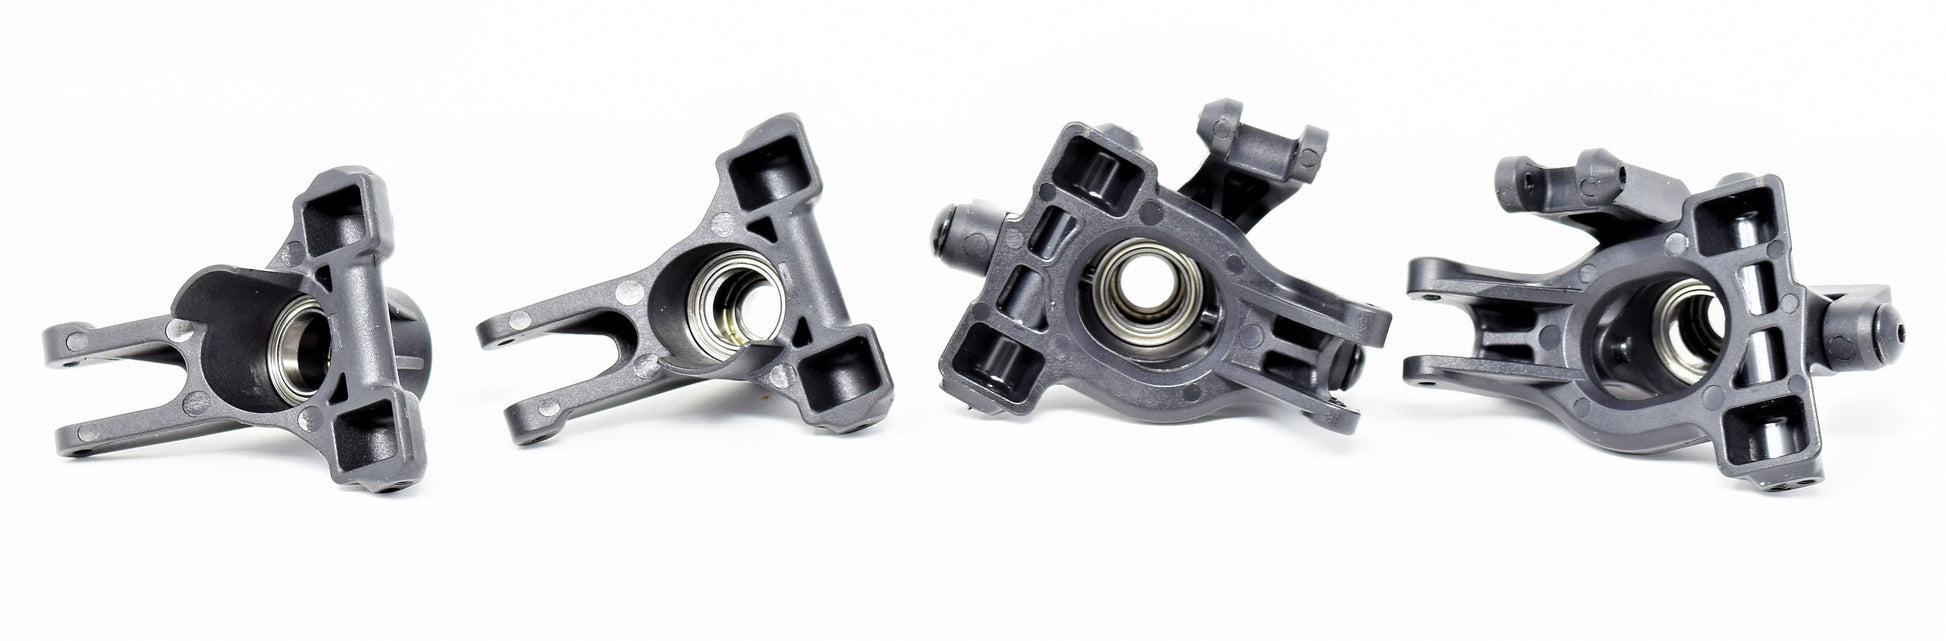 Arrma OUTCAST 4x4 4s BLX - HUBS, bearings front/Rear Uprights kraton ARA102692 - Dirt Cheap RC SAVING YOU MONEY, ONE PART AT A TIME